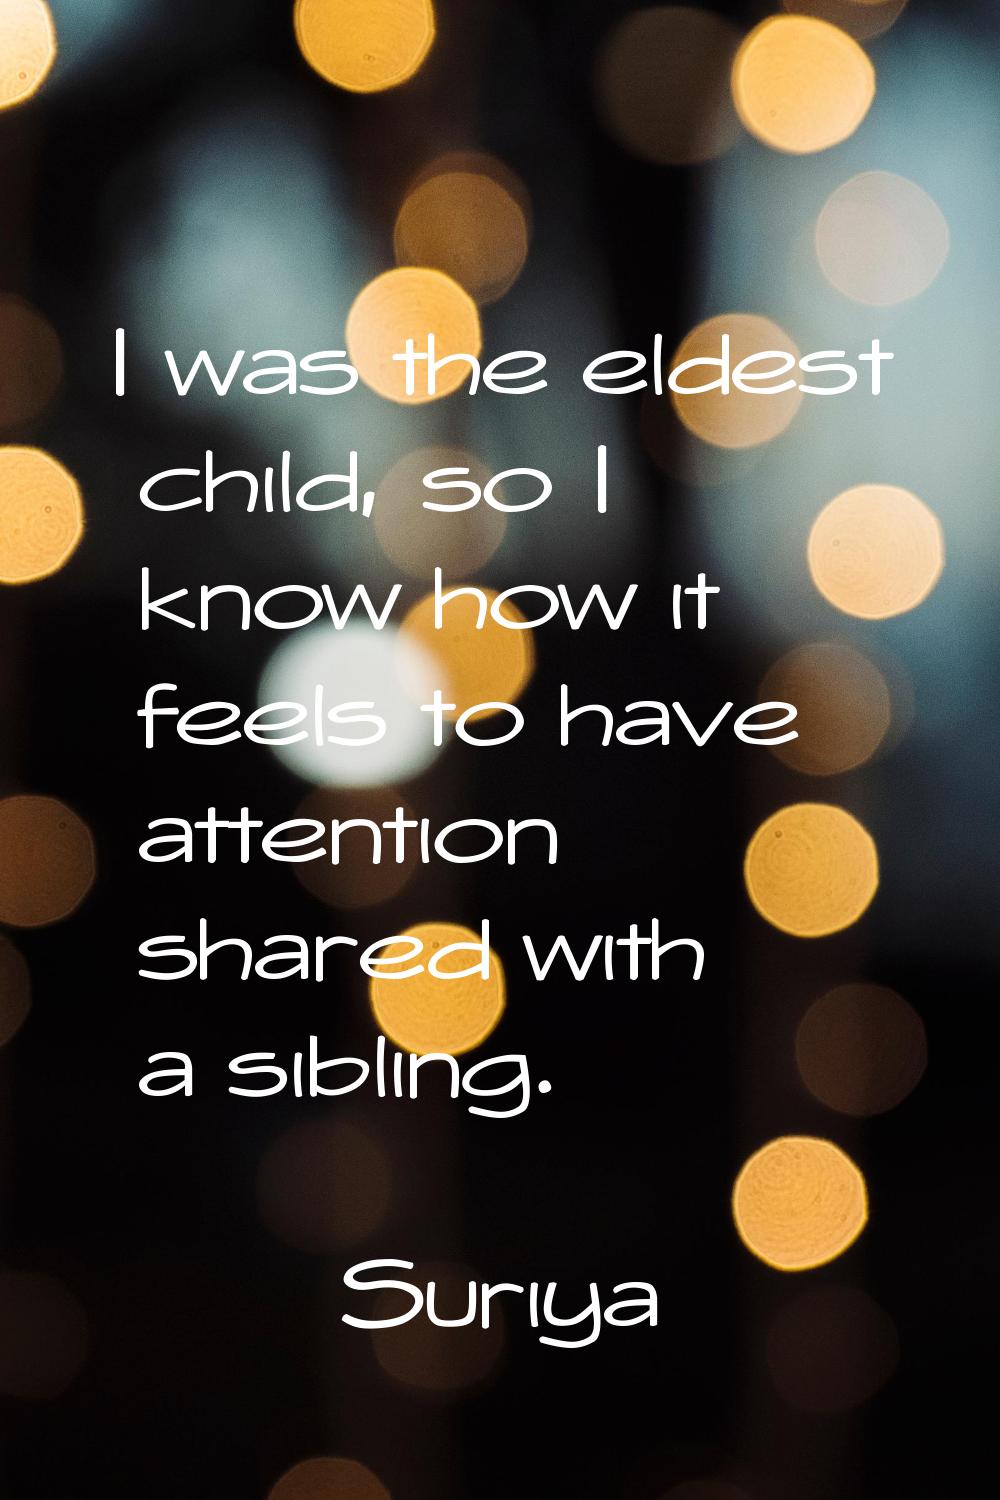 I was the eldest child, so I know how it feels to have attention shared with a sibling.